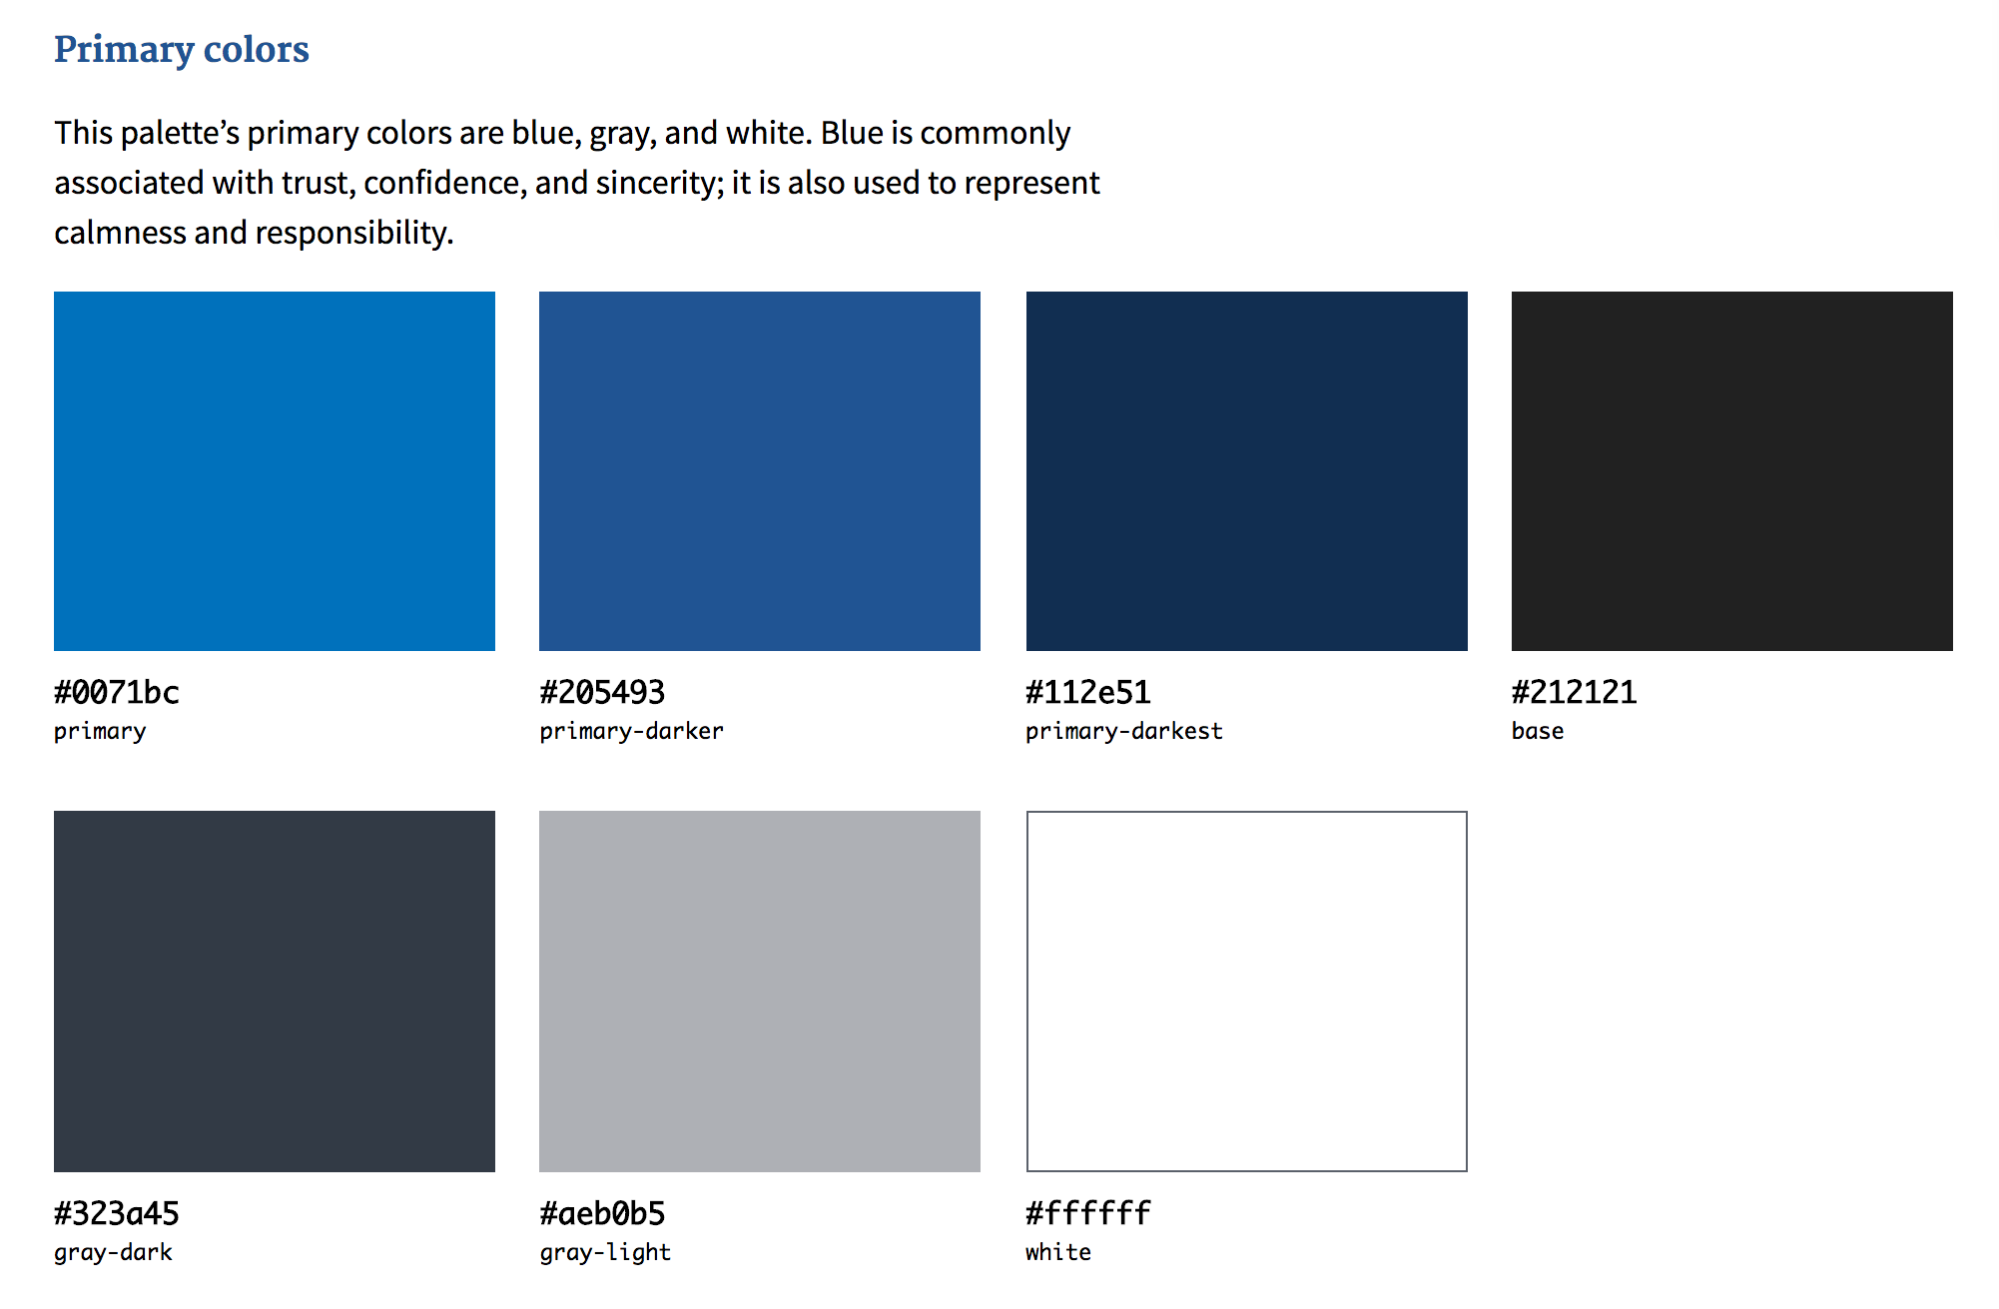 Primary colors of blue, gray and white from the color palette